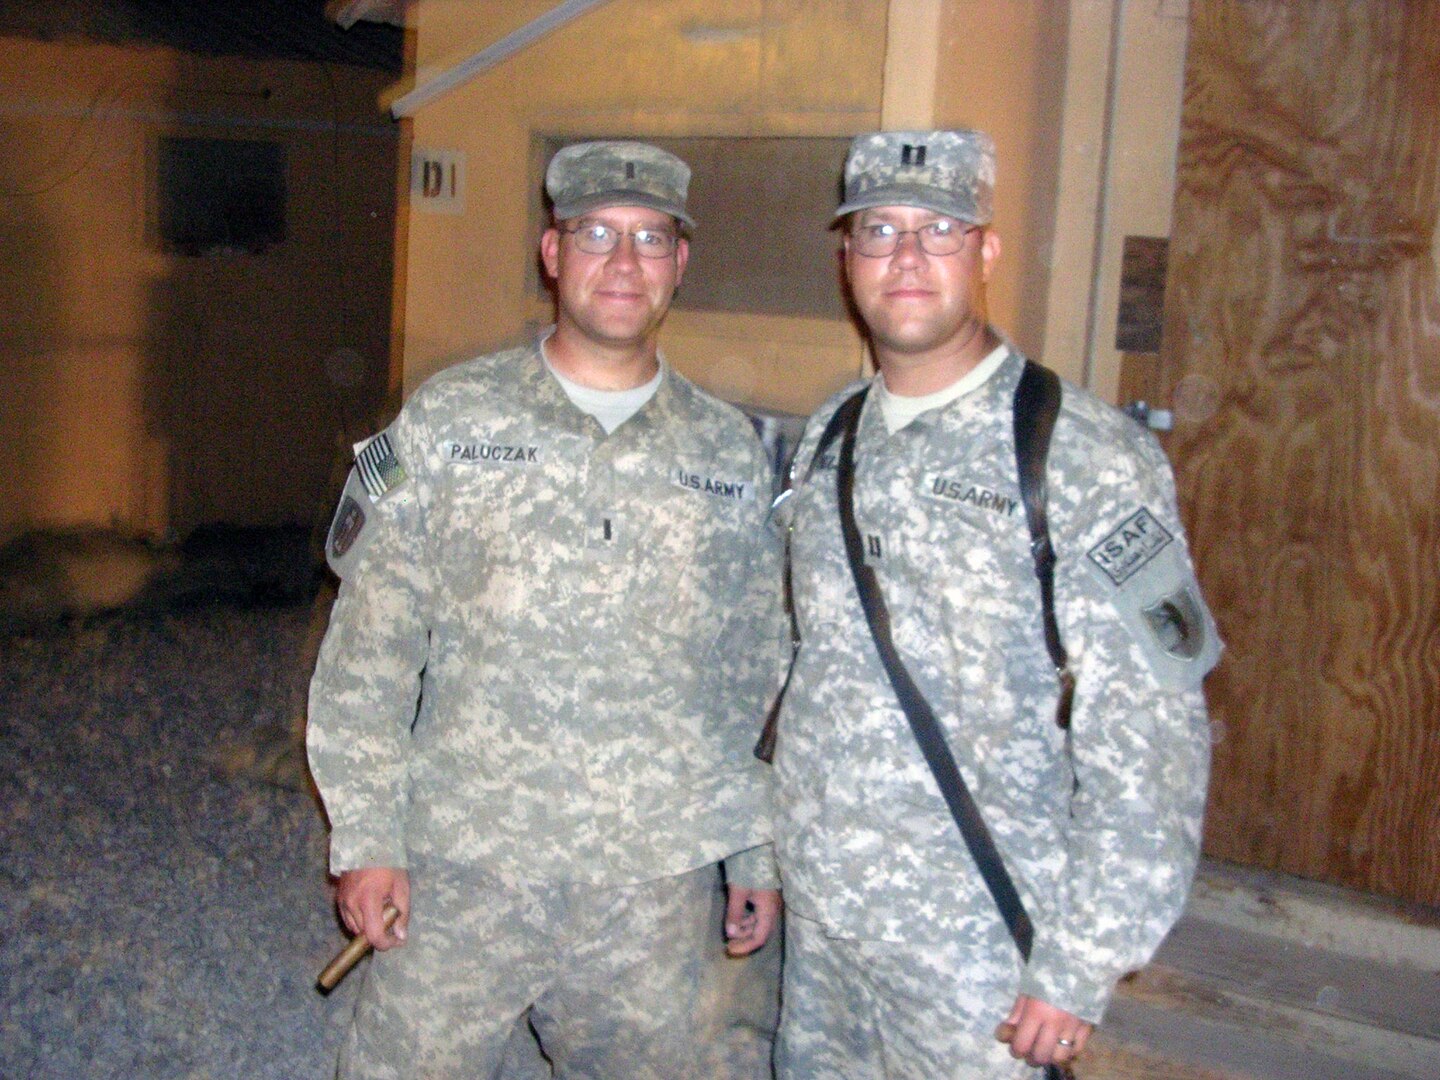 Army 1st Lt. Michael Paluczak and his twin brother, Army Capt. John Paluczak, enjoy a reunion on Bagram Airfield in eastern Afghanistan's Kabul province, Sept. 7, 2010.